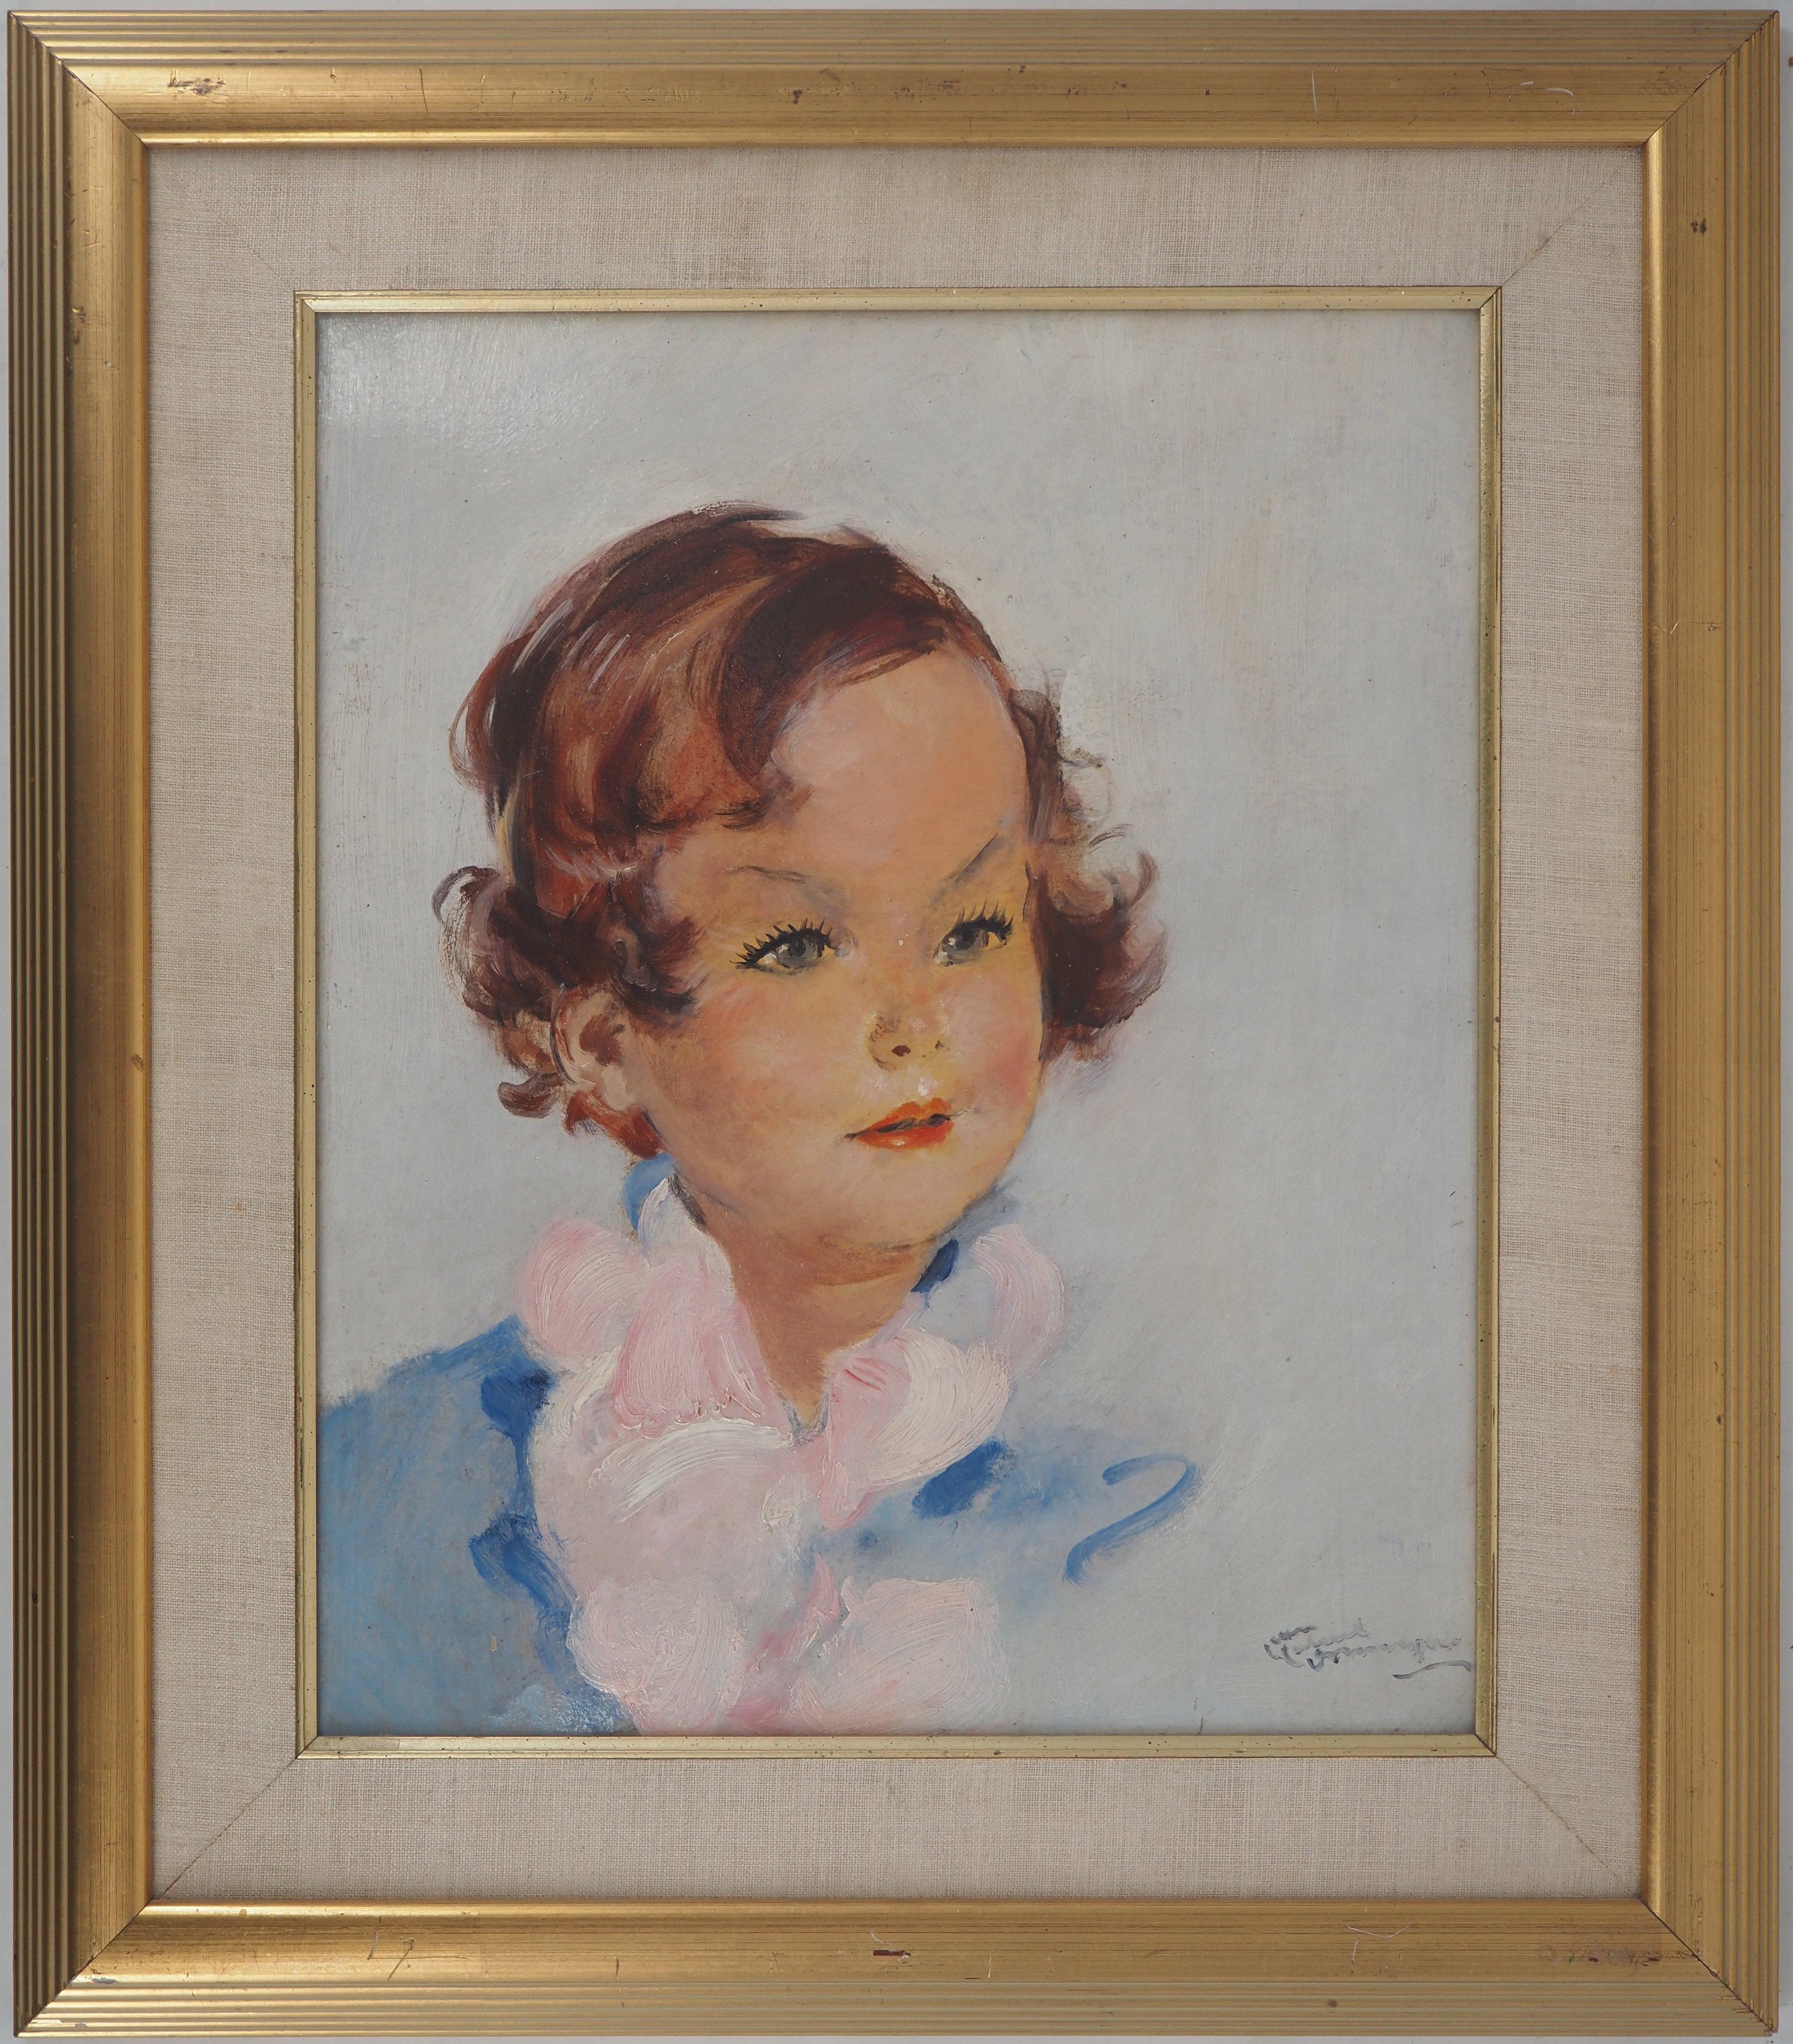 Jean-Gabriel Domergue Portrait Painting - Young Girl with Pink Scarf - Original Oil Painting, Handsigned 